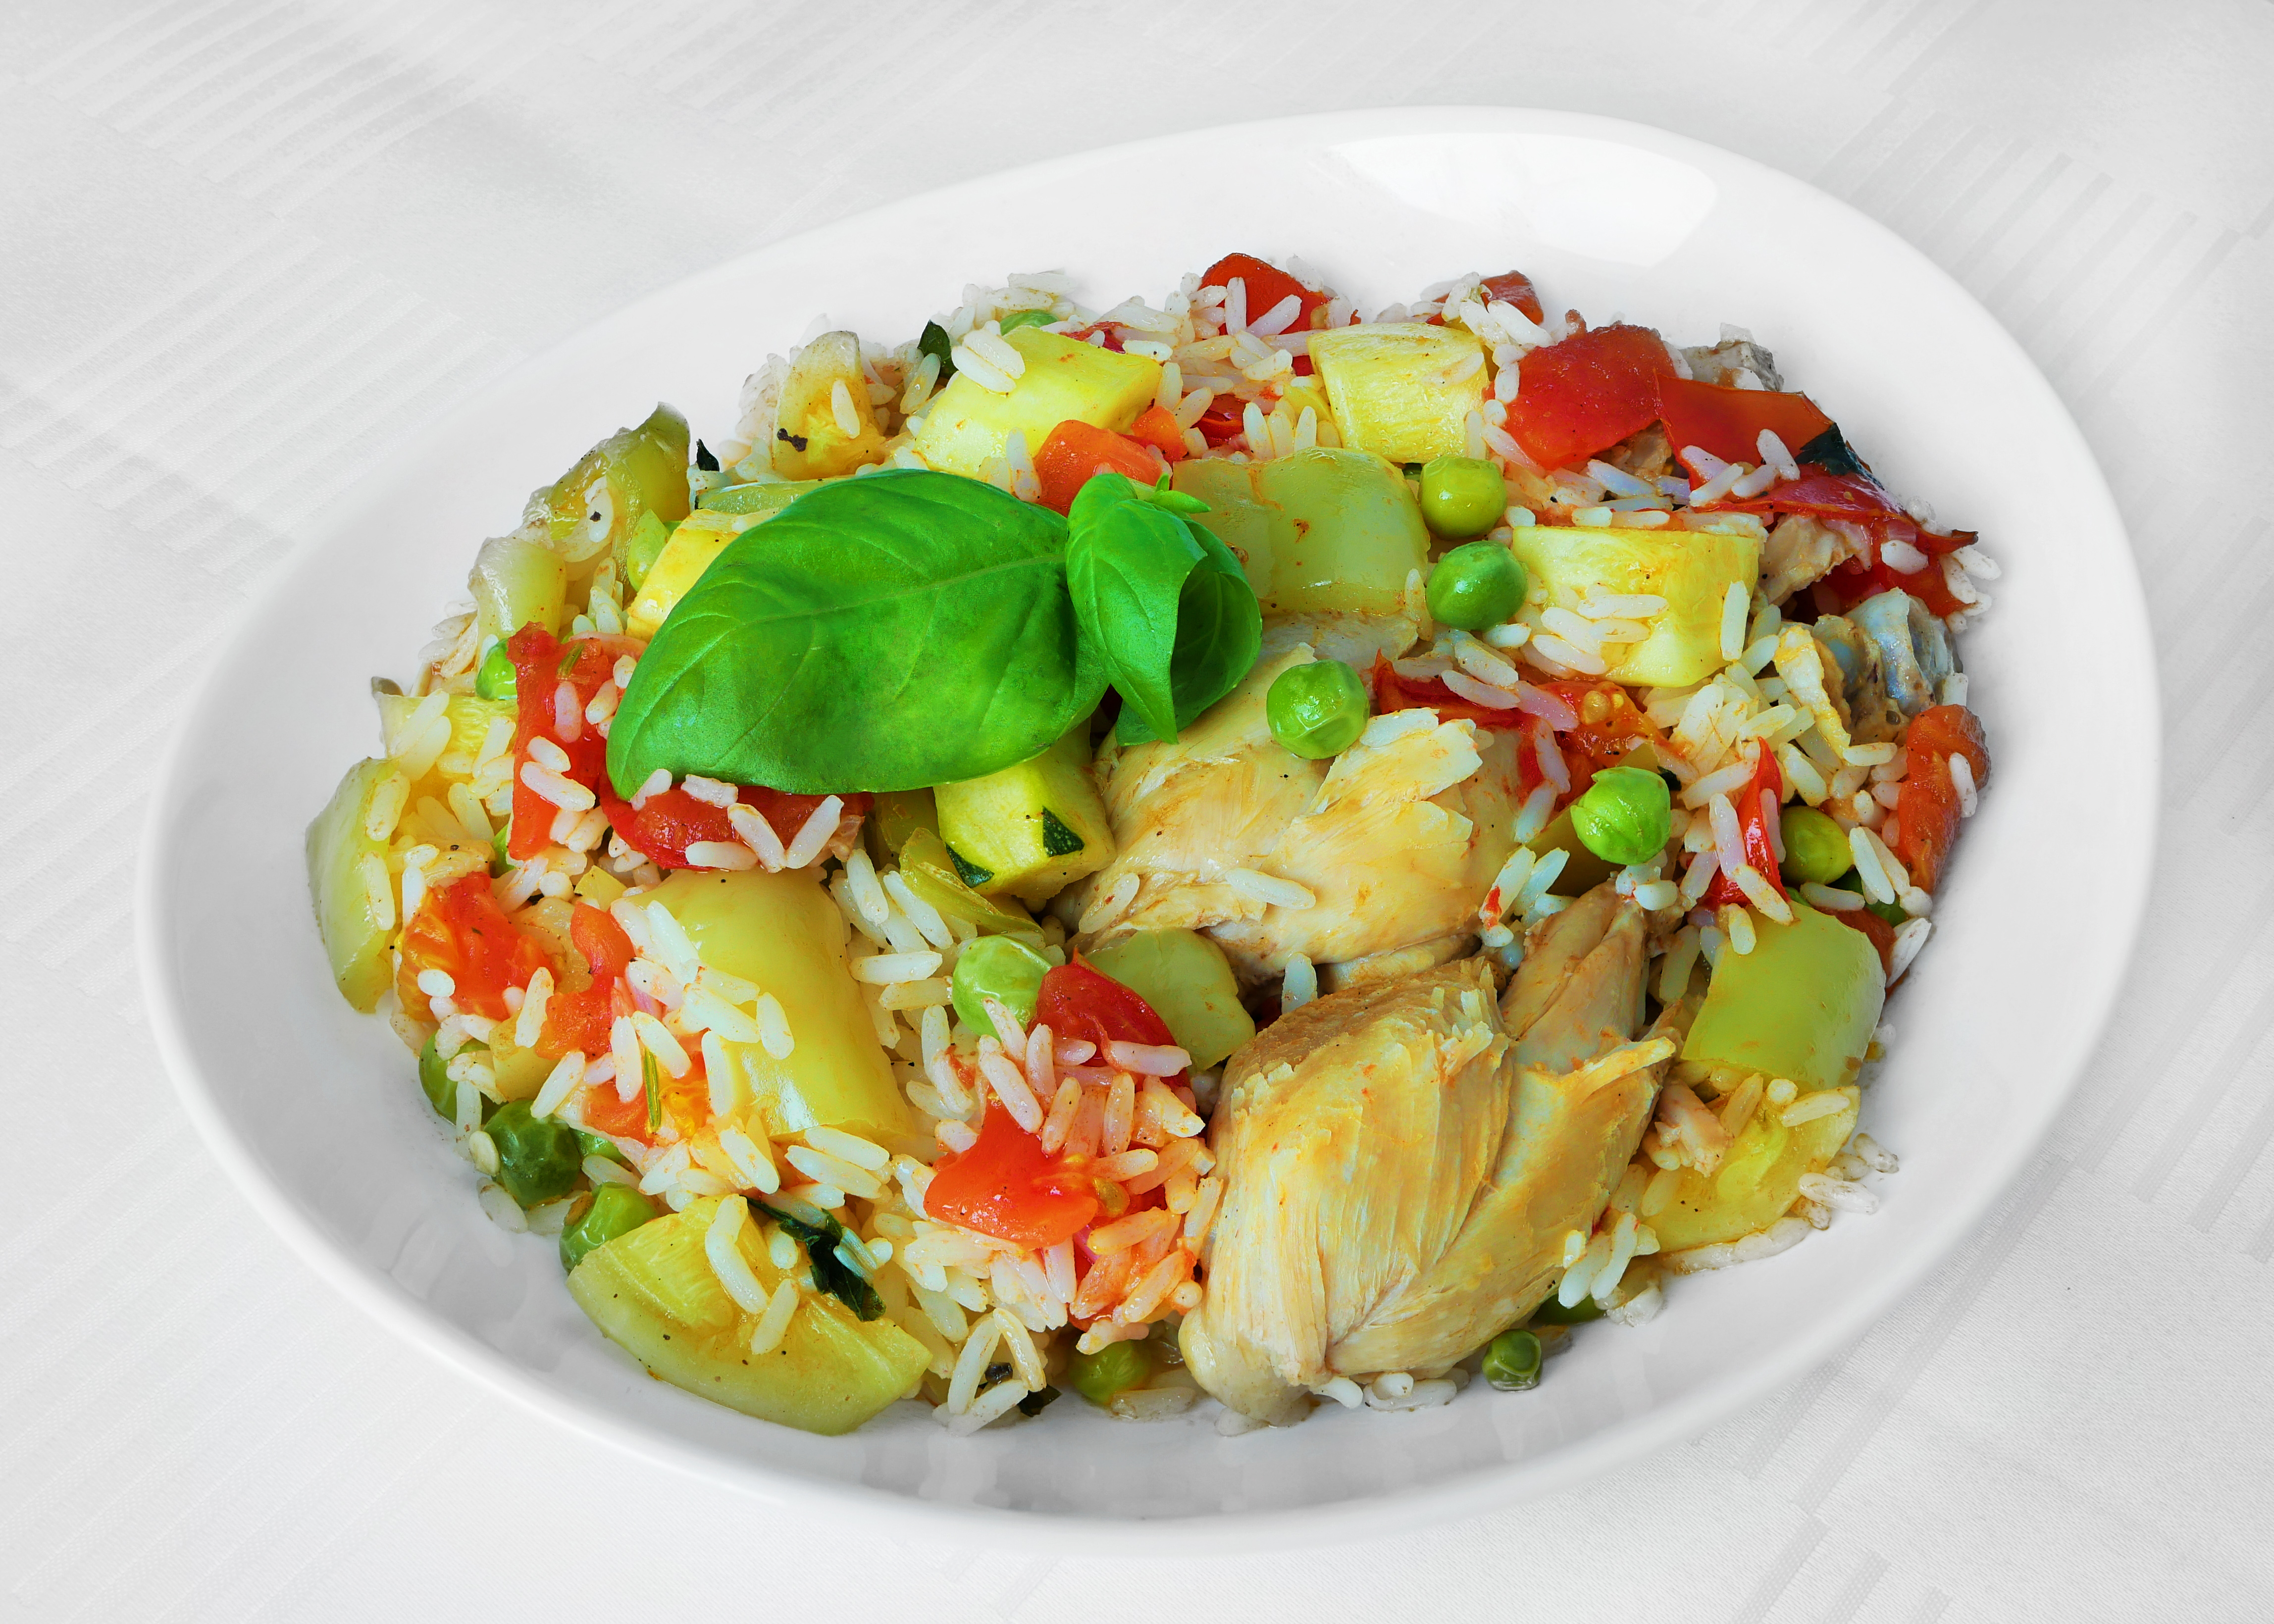 Parboiled rice with chicken, peppers, cucurbita, peas and tomato